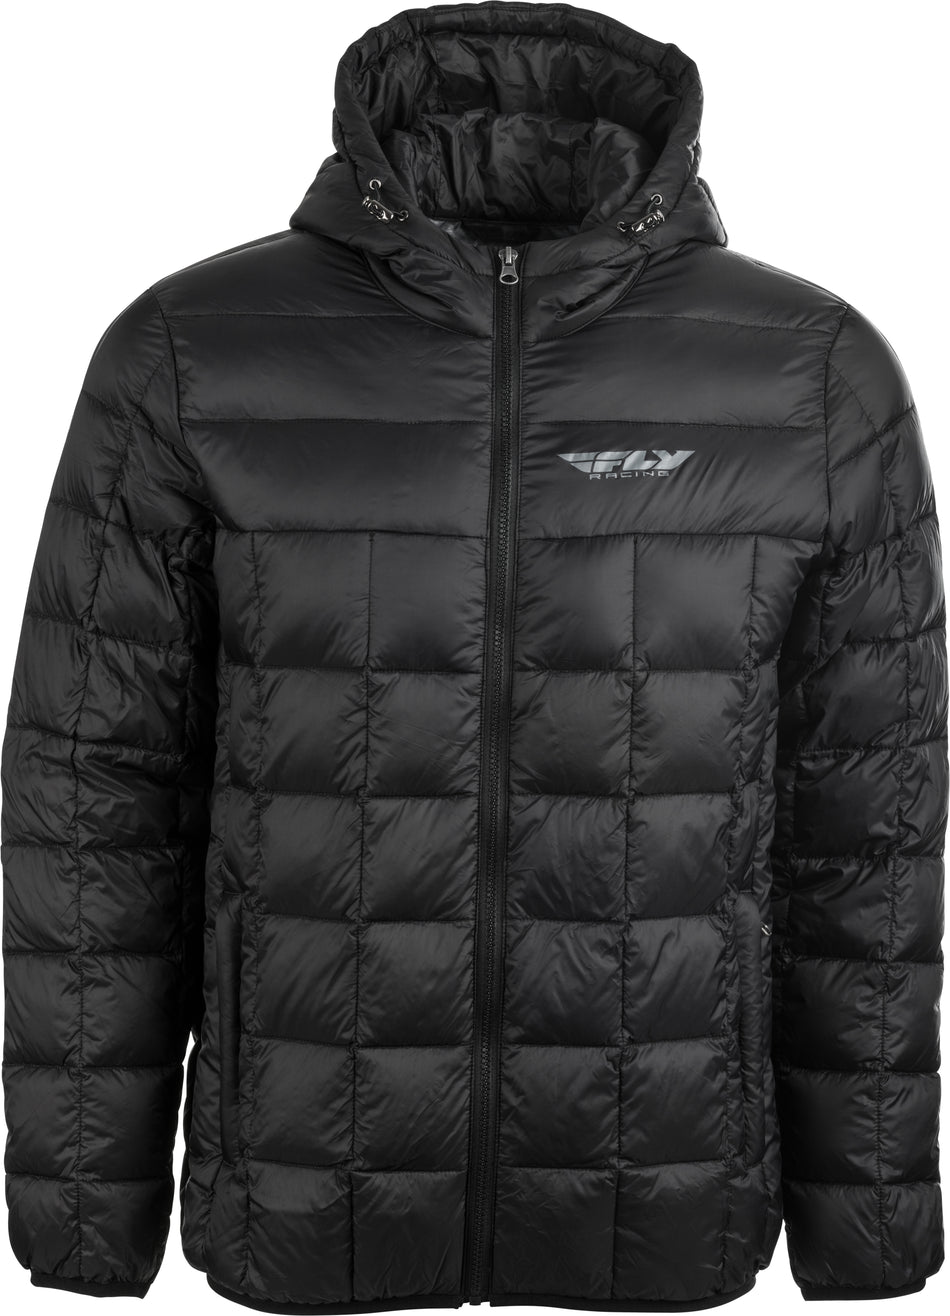 FLY RACING Fly Spark Down Jacket Black Md 354-6180M